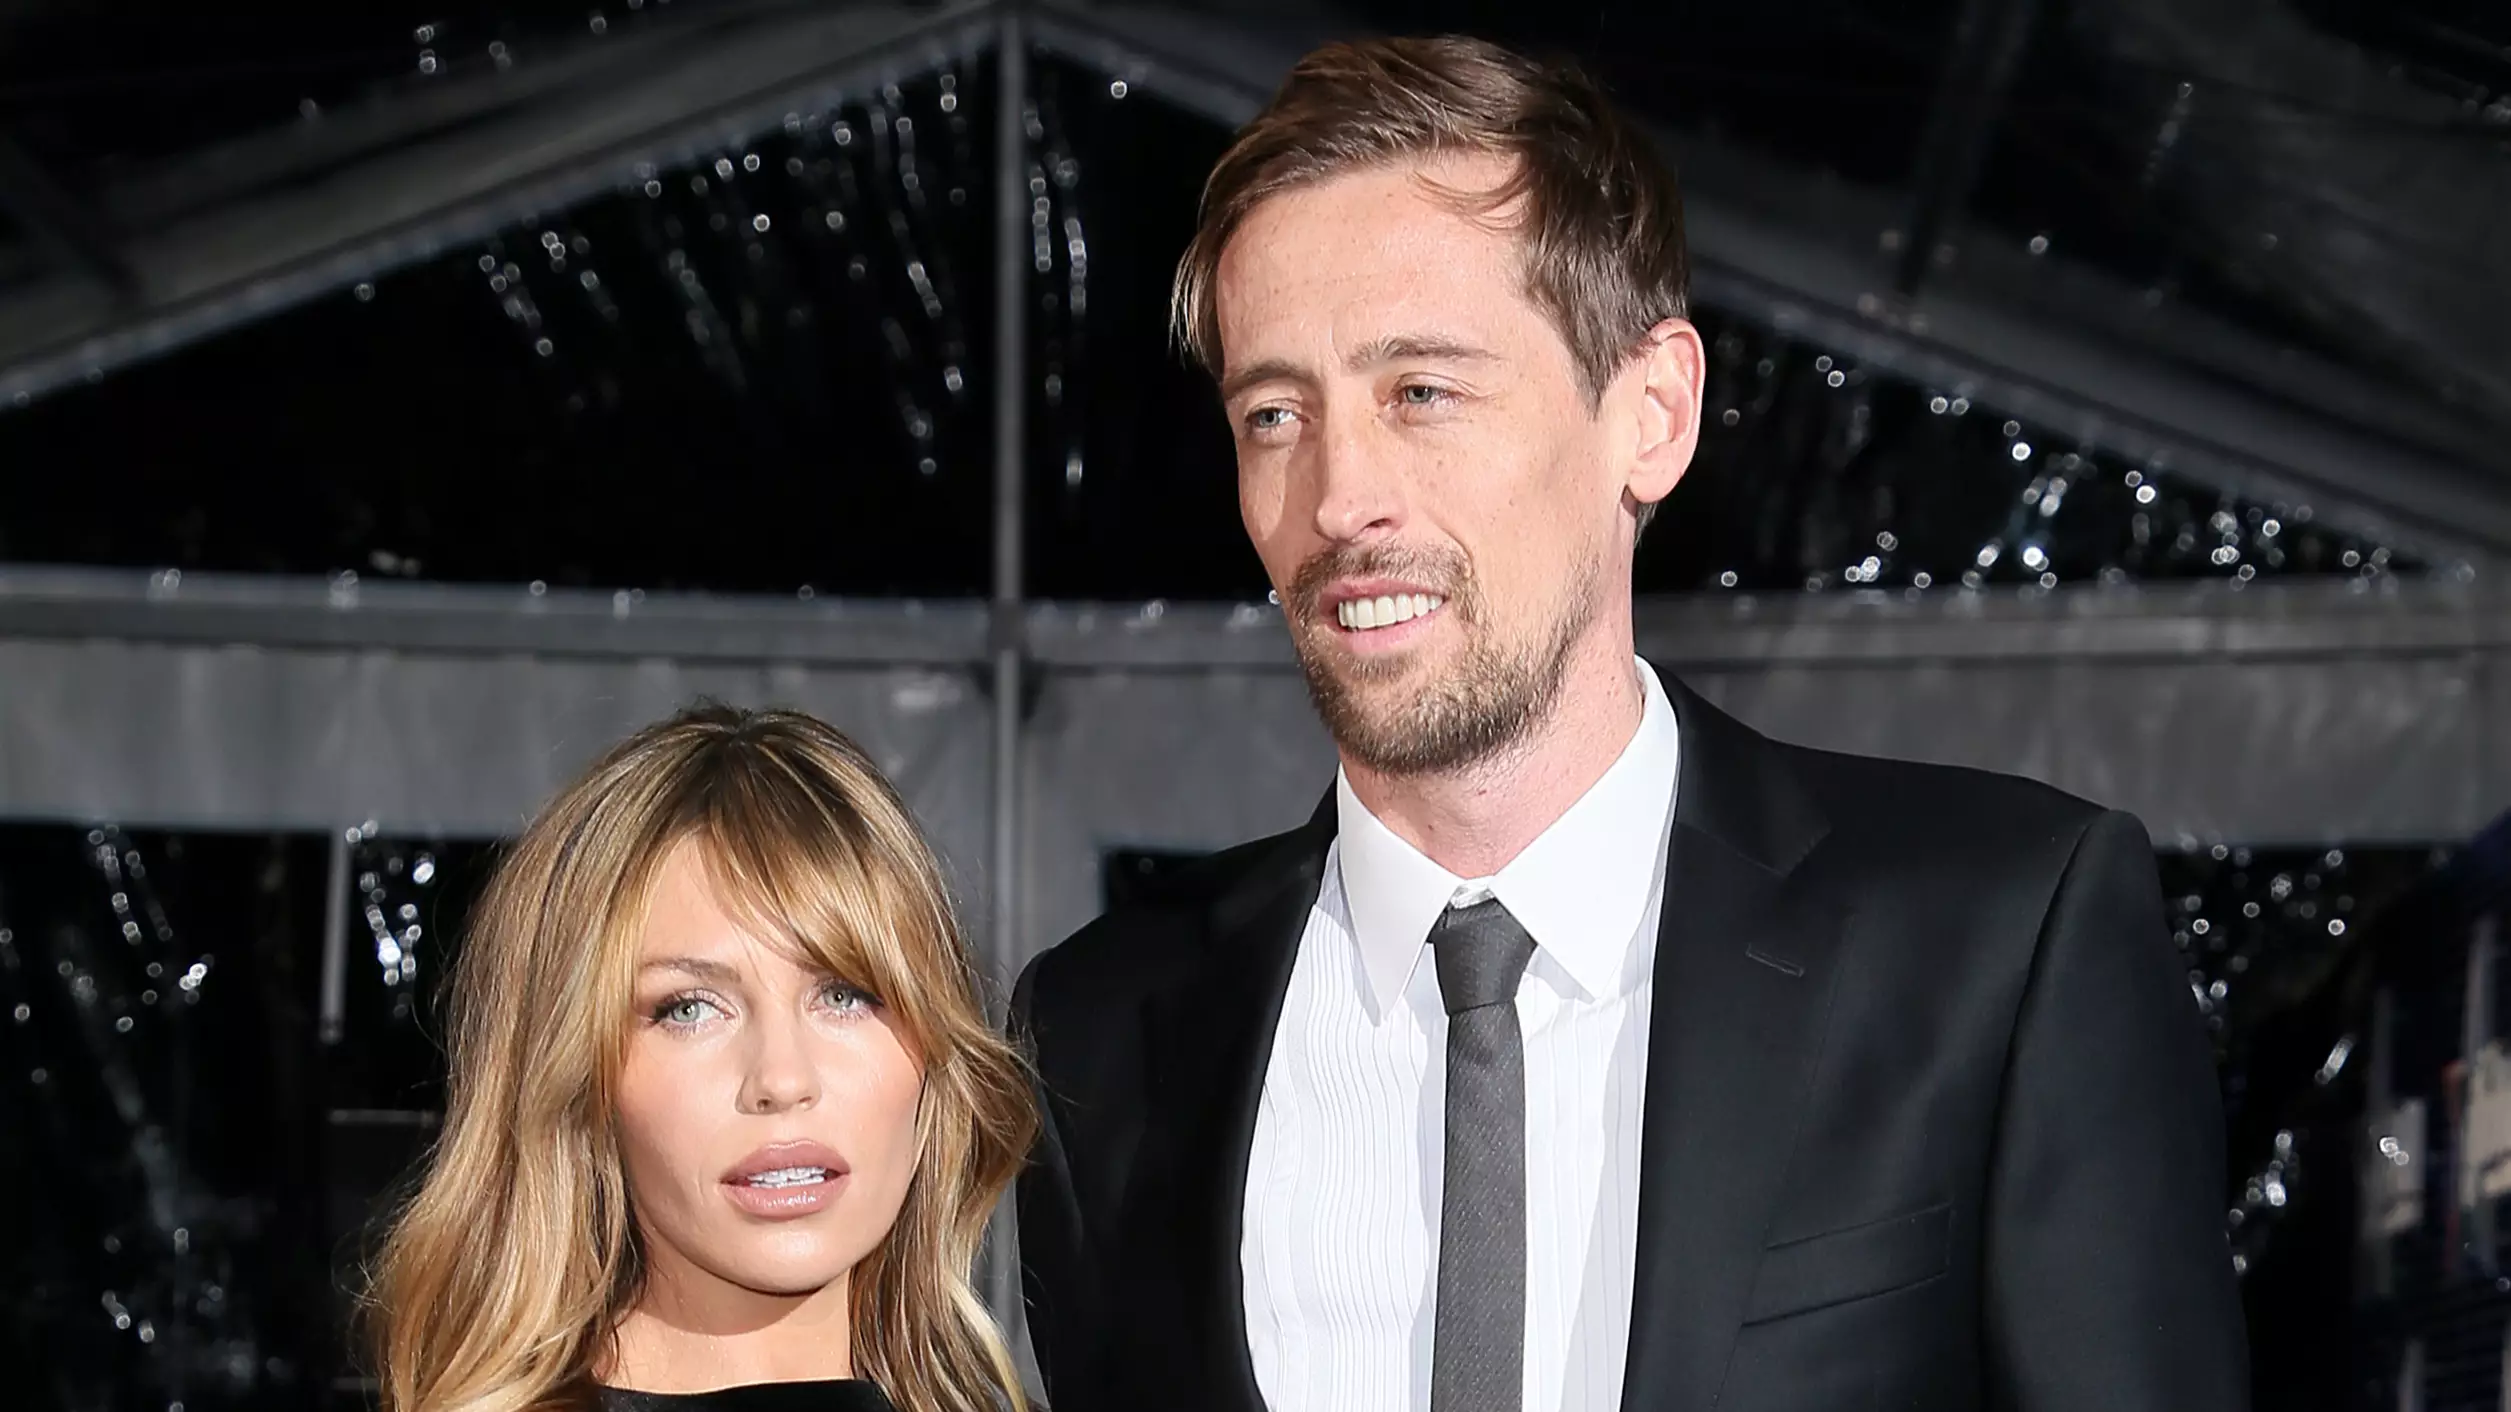 Peter Crouch Announces His New Baby's Name With A Hilarious Tweet